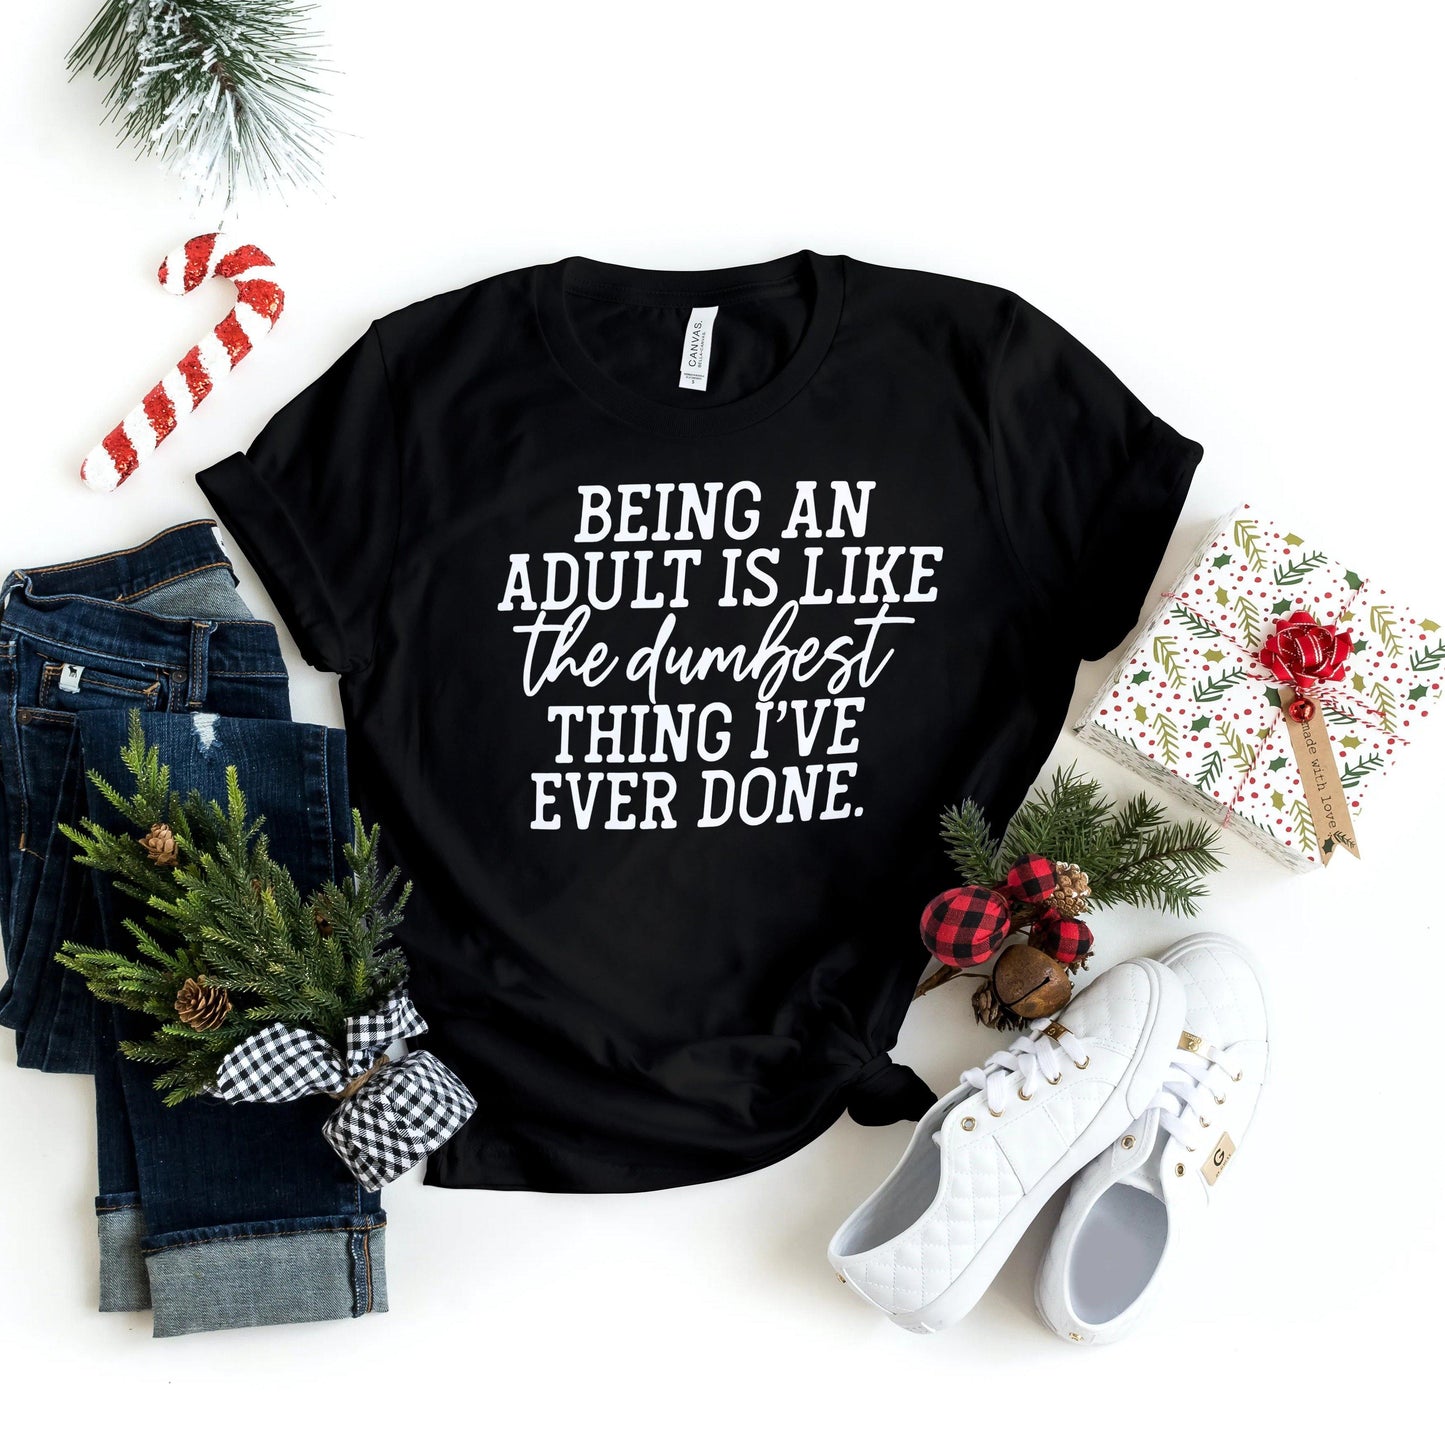 Being An Adult is Like the Dumbest Thing I've Ever Done - T-Shirt - Healthy Wealthy Skinny